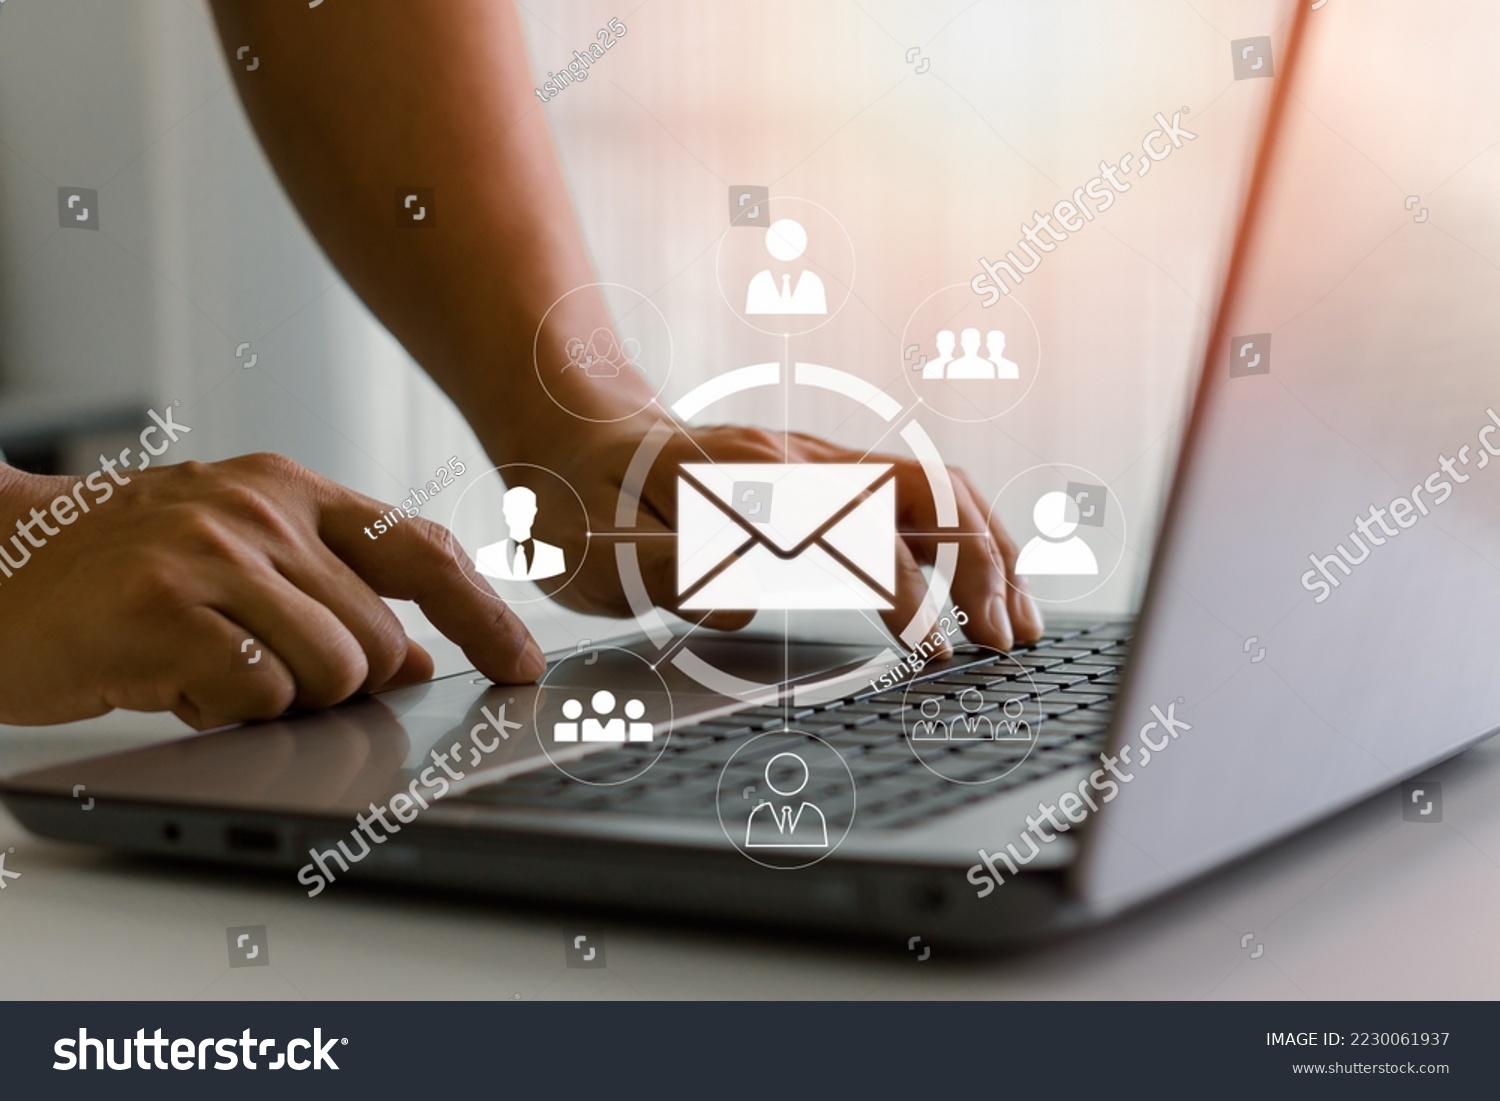 Businessman sending email by laptop. Online people network. Using the internet for communication. Email marketing, data center and internet advertising concept. send e-mail or newsletter to customers. #2230061937